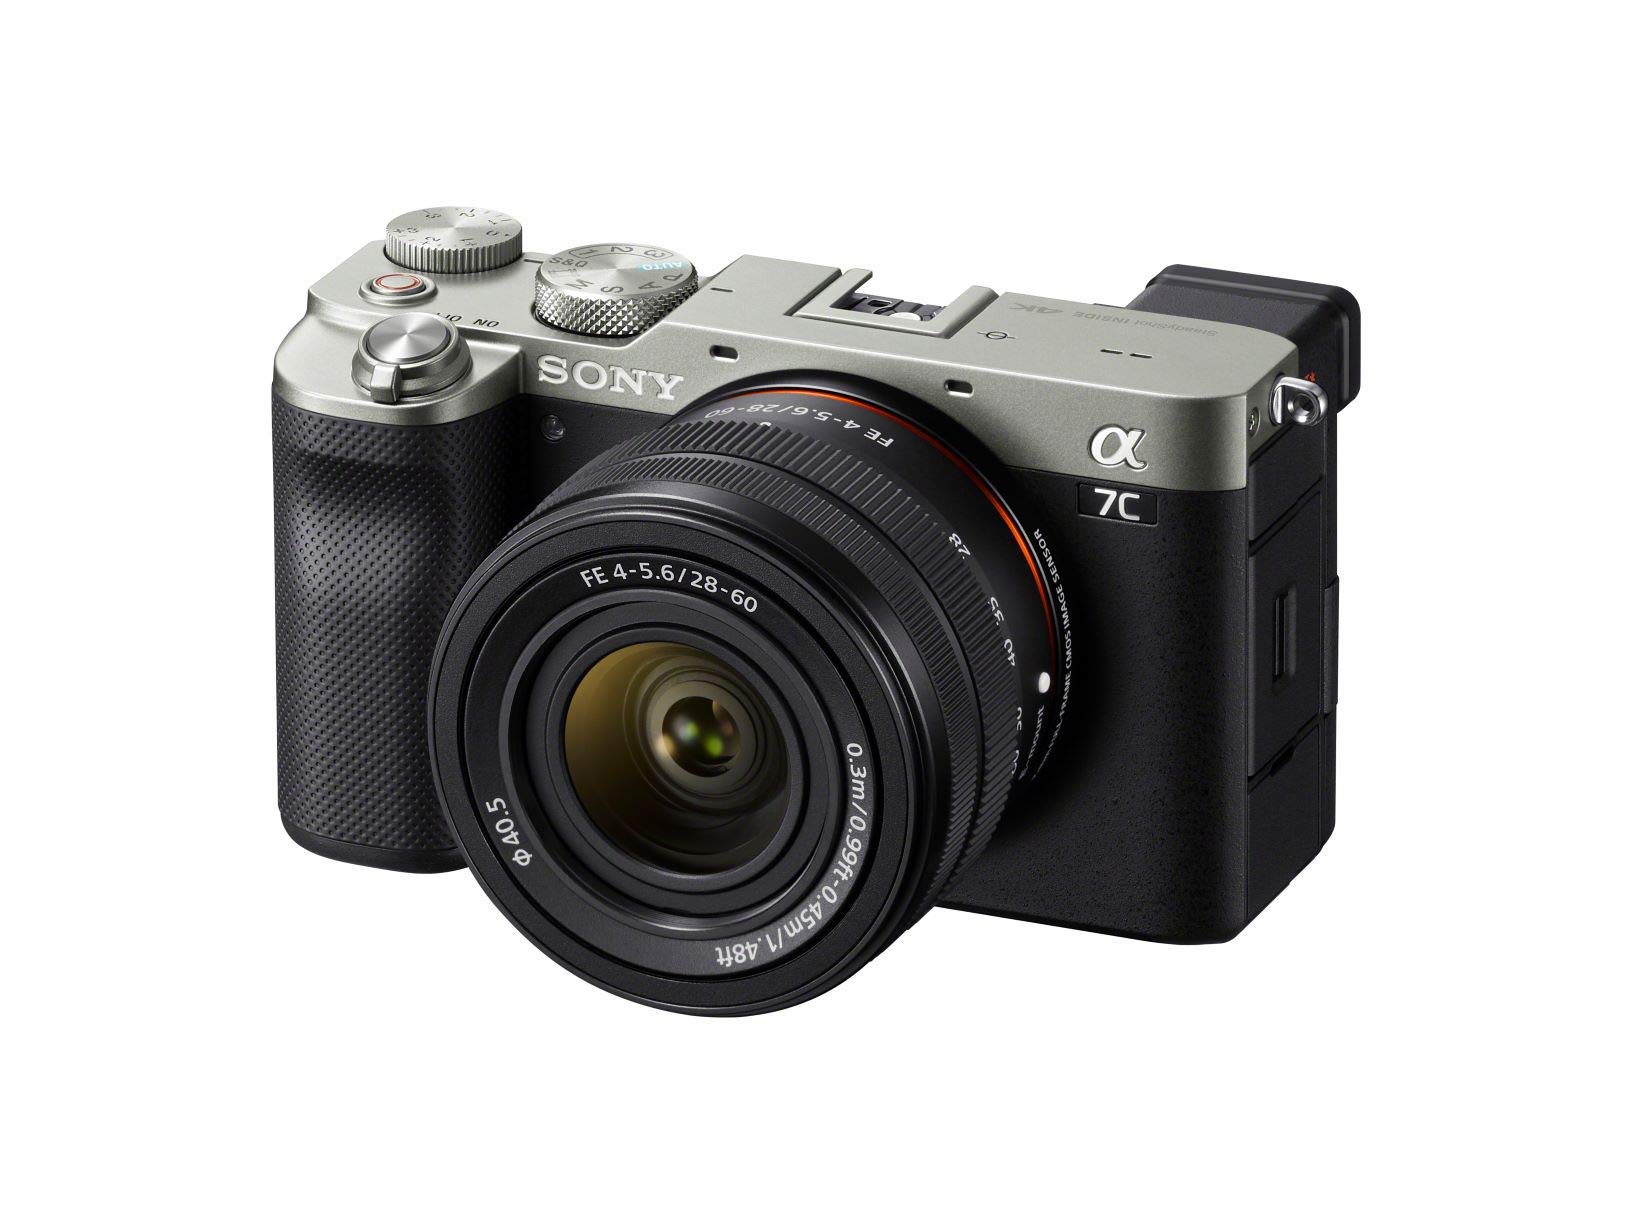 Picture of Sony 7C Compact Camera With 28-60mm Lens